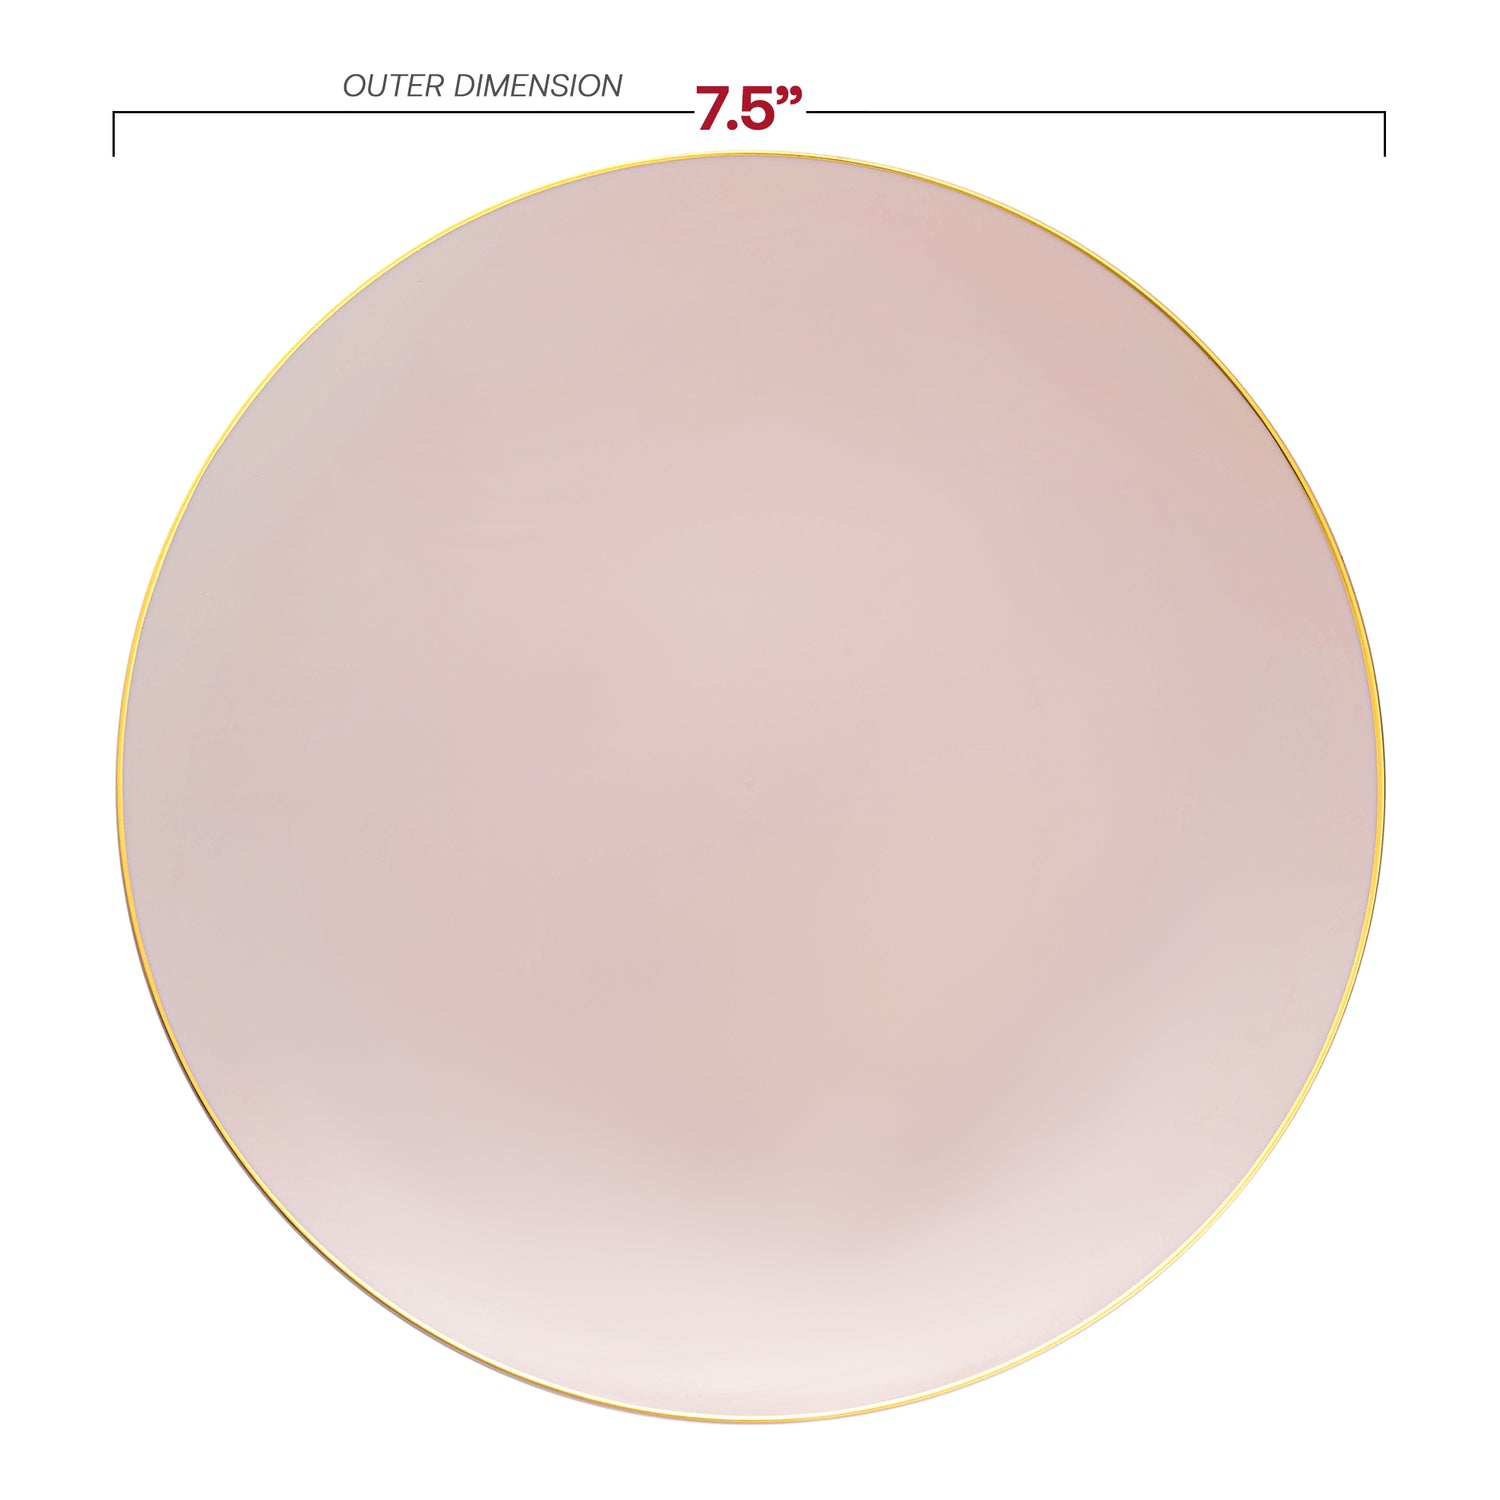 Pink with Gold Rim Organic Round Disposable Plastic Appetizer/Salad Plates (7.5") Dimension | The Kaya Collection